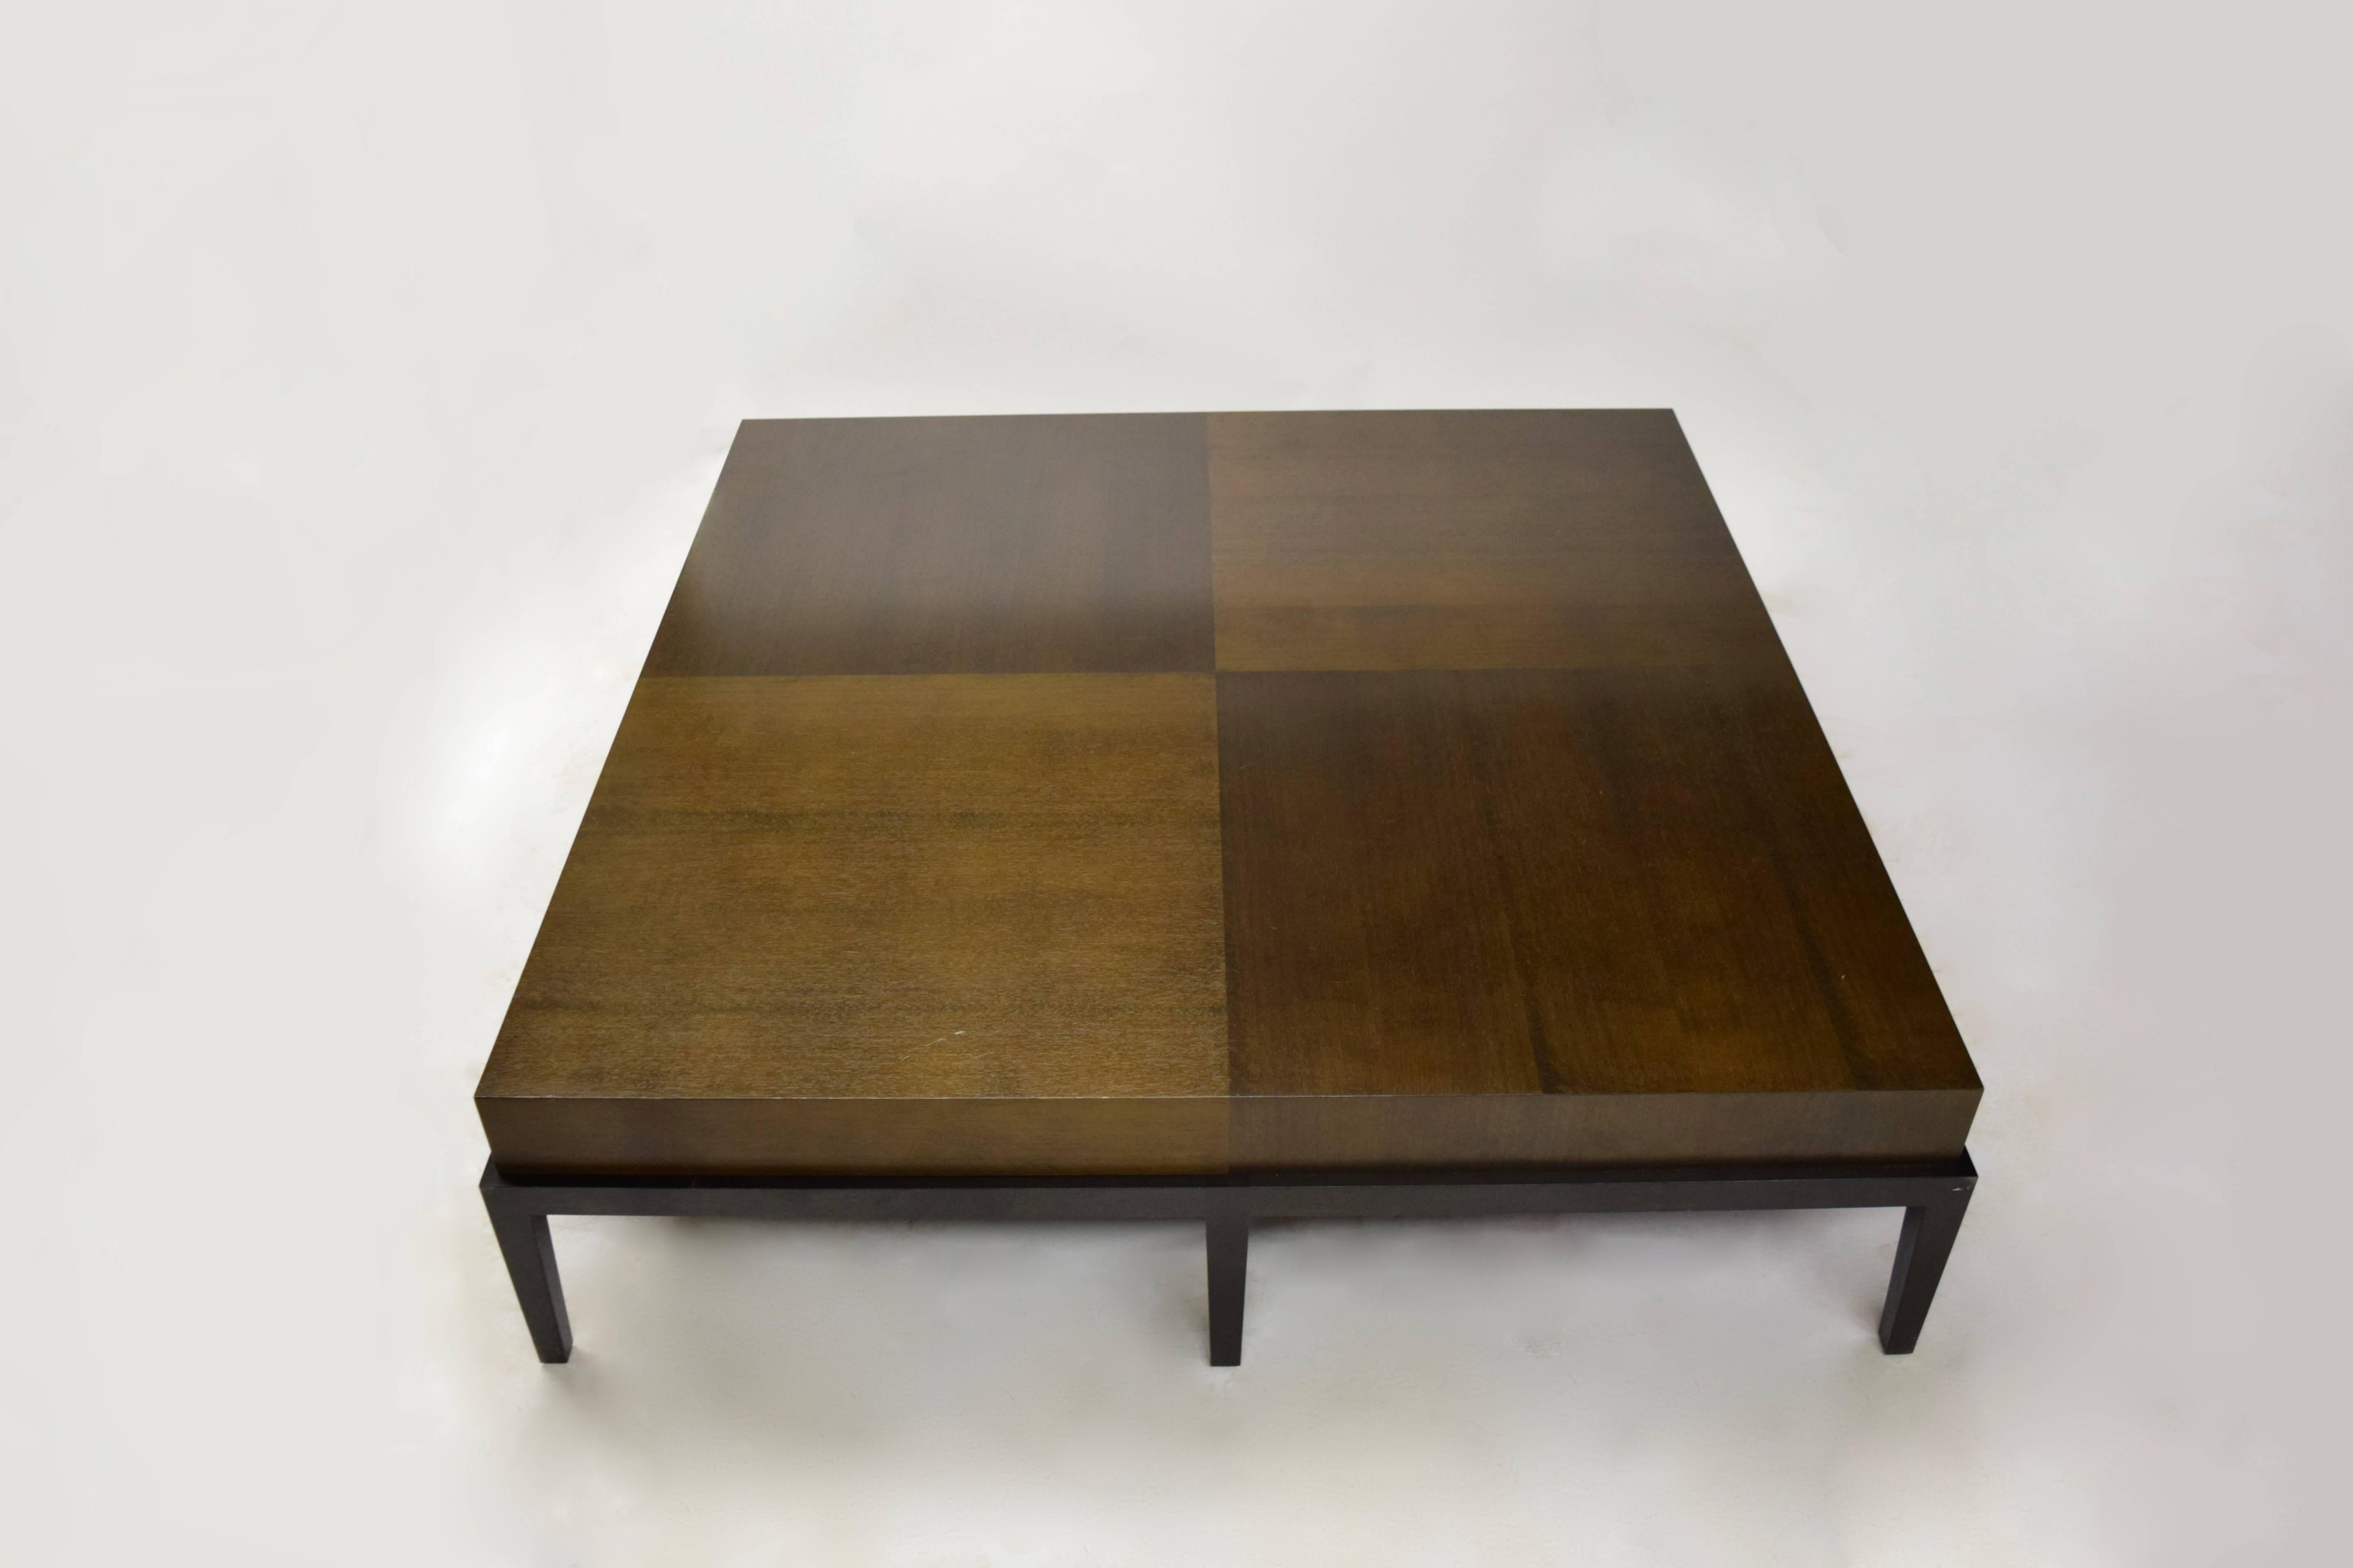 Late 20th Century Coffee Table by Christian Liaigre for Holly Hunt, circa 1990, American